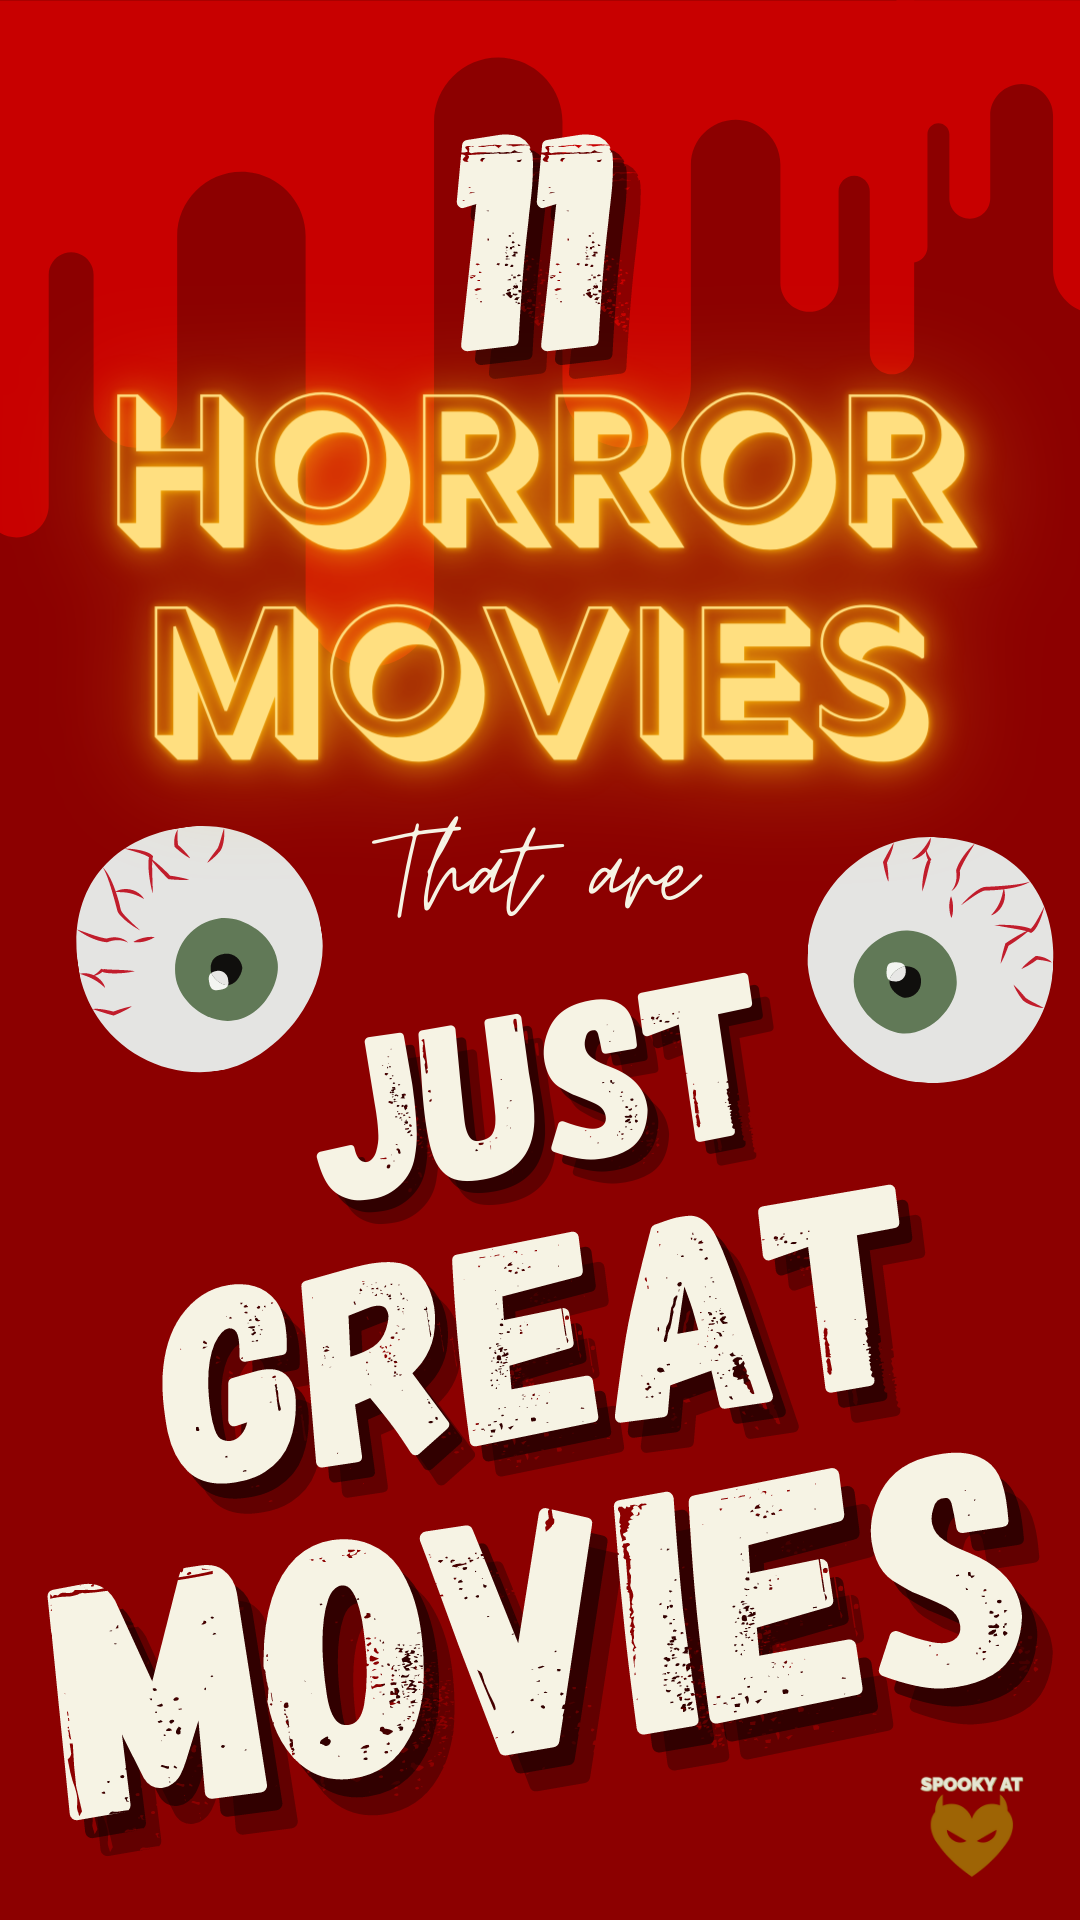 genuinely great horror movies - Pinterest pin